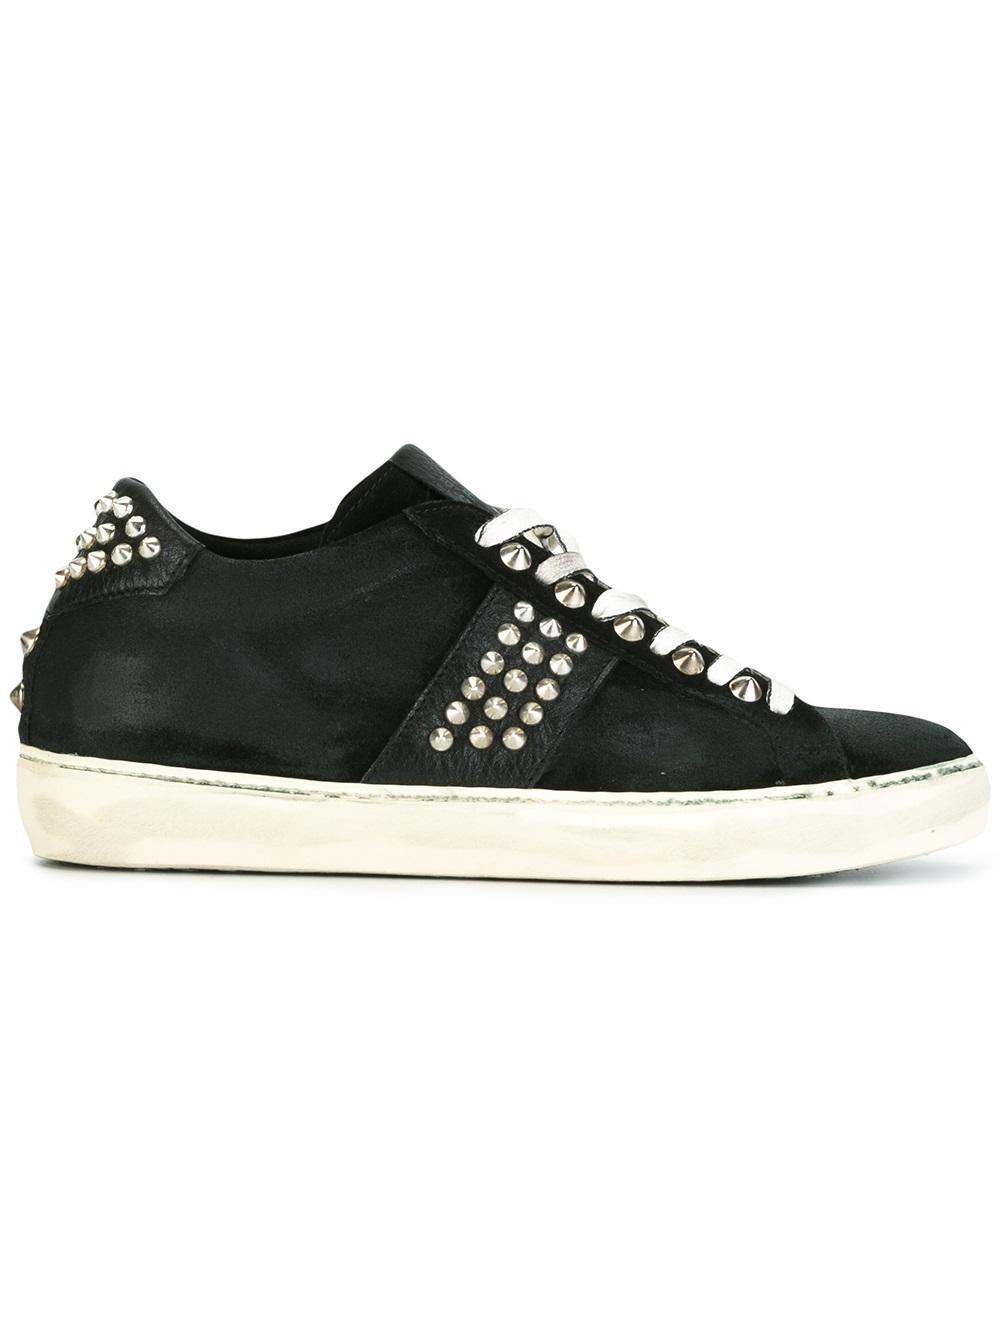 Lyst - Leather Crown Studded Lace-up Sneakers in Black